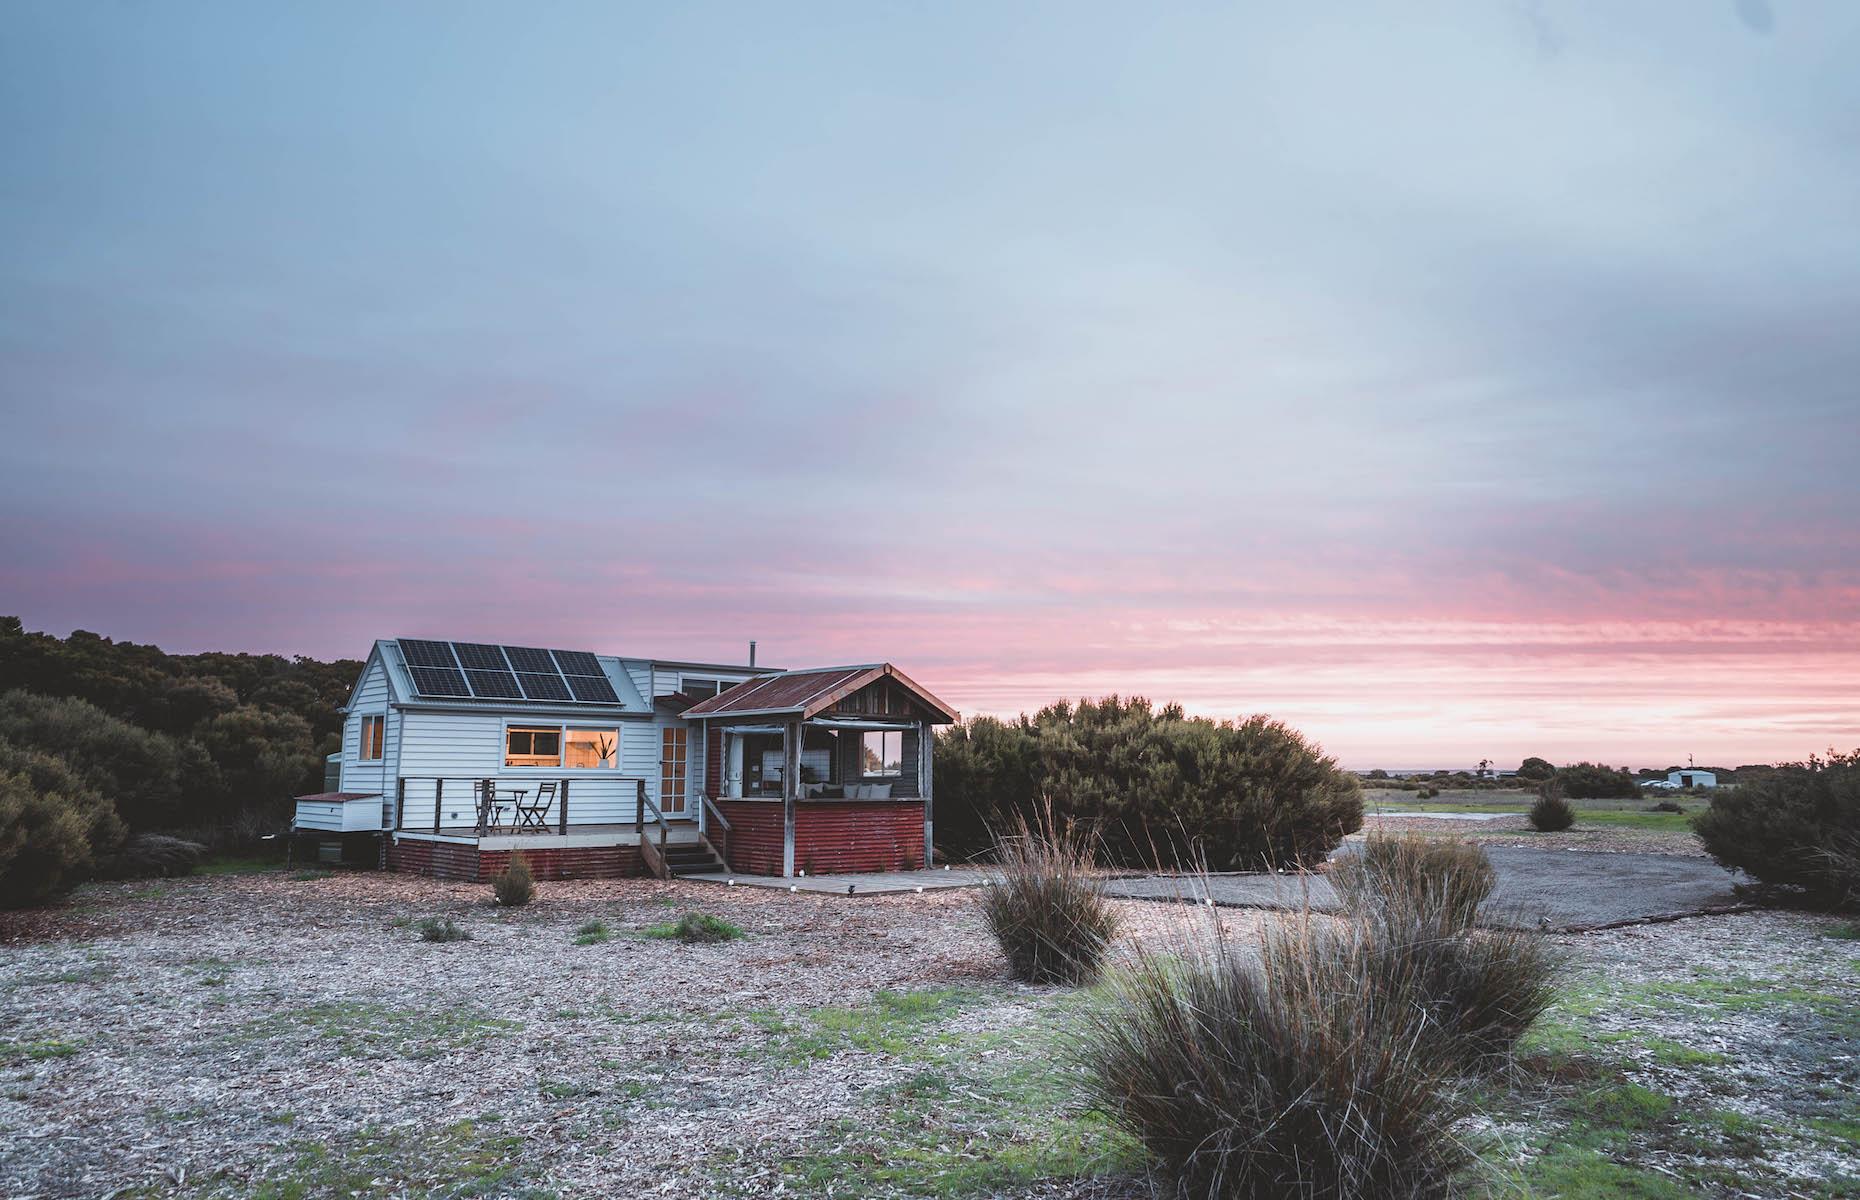 <p>A stone’s throw from Marion Bay on South Australia’s Yorke Peninsula, this family-run glamping enterprise is a real gem. Guests can stay in a beachside bell tent or go for the off-grid <a href="https://baysideglamping.com.au/tiny-house/">Tiny House</a> (pictured) just out of town. The cozy cabin, which uses solar power and rainwater, has a large fairy-light festooned deck with lounge and barbecue, along with a hot shower, comfy bed and large windows for enjoying the uninterrupted views of the surrounding grassland, where emus and roos are the only likely onlookers.</p>